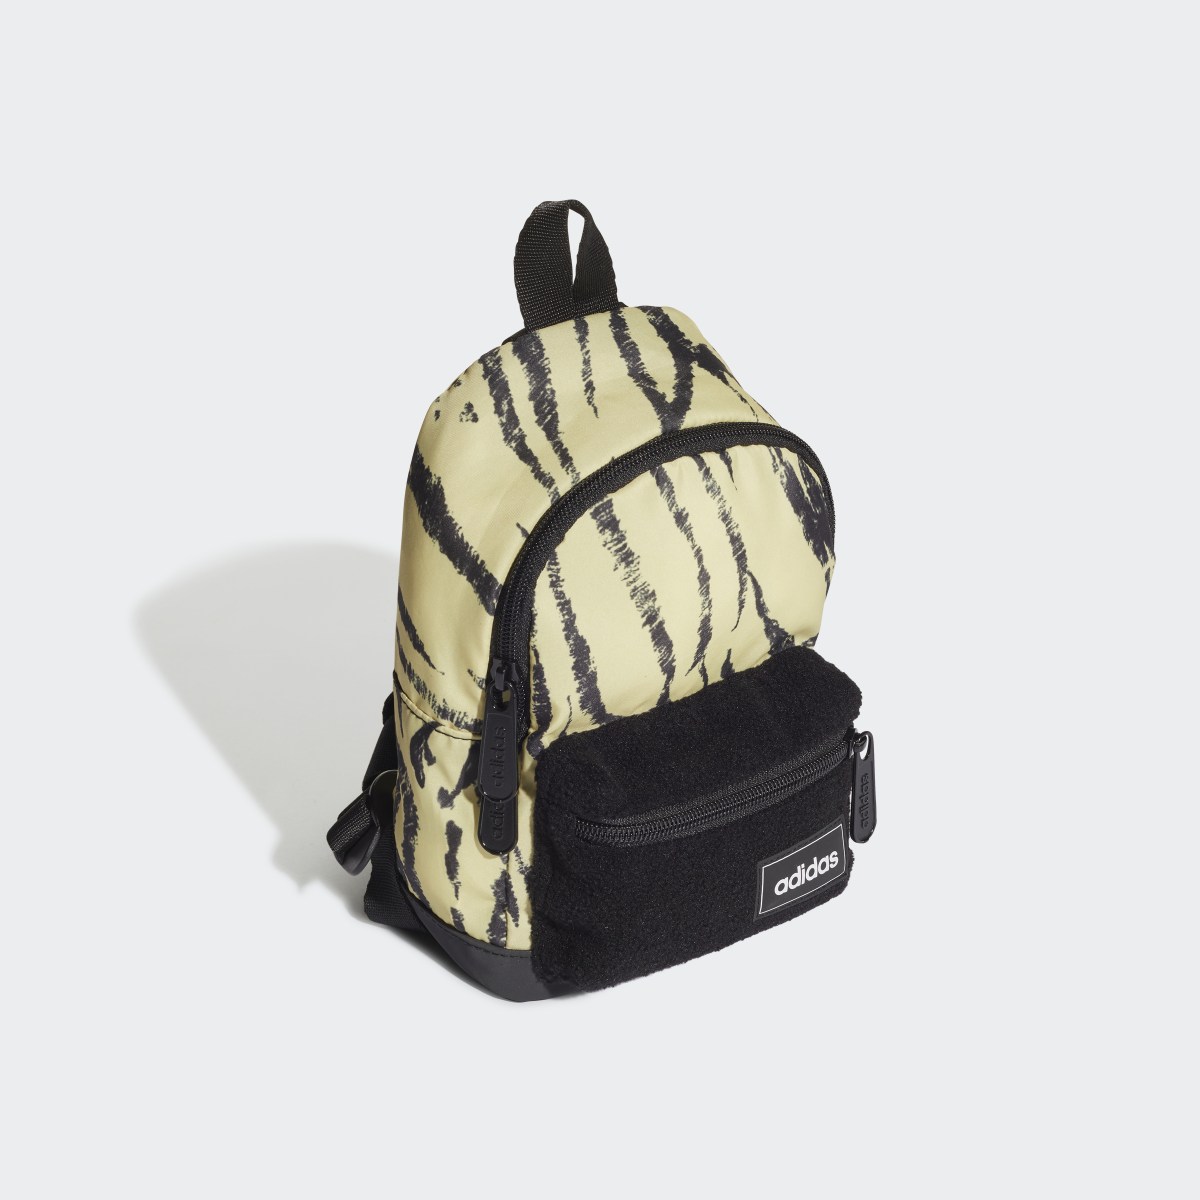 Adidas Tailored for Her Sport to Street Training Mini Backpack. 4